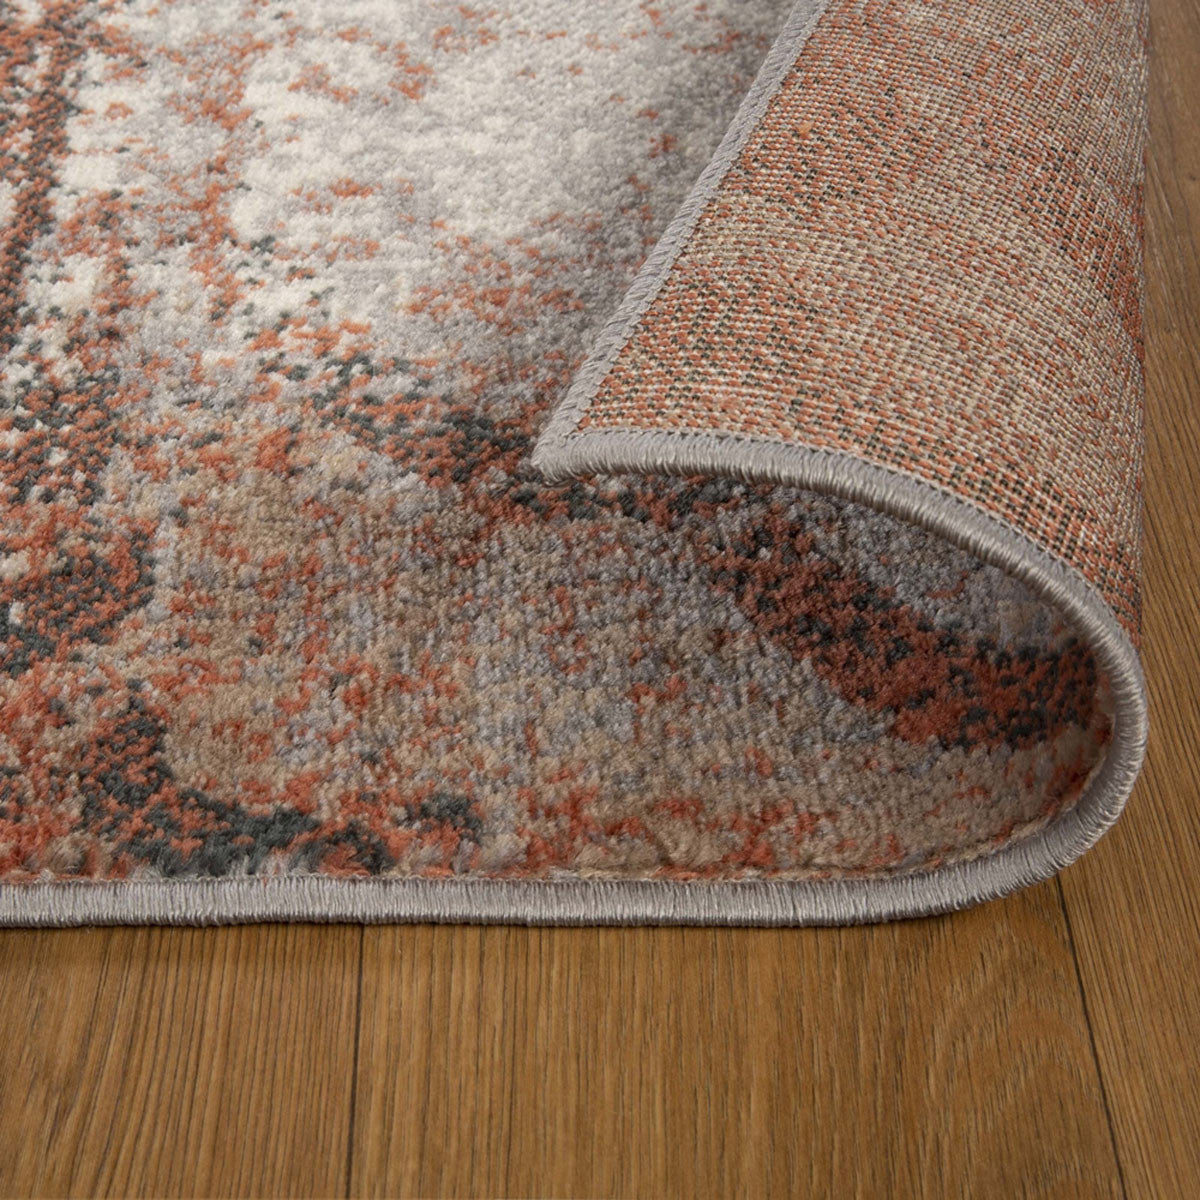 4' X 6' Rust And Gray Damask Distressed Stain Resistant Area Rug